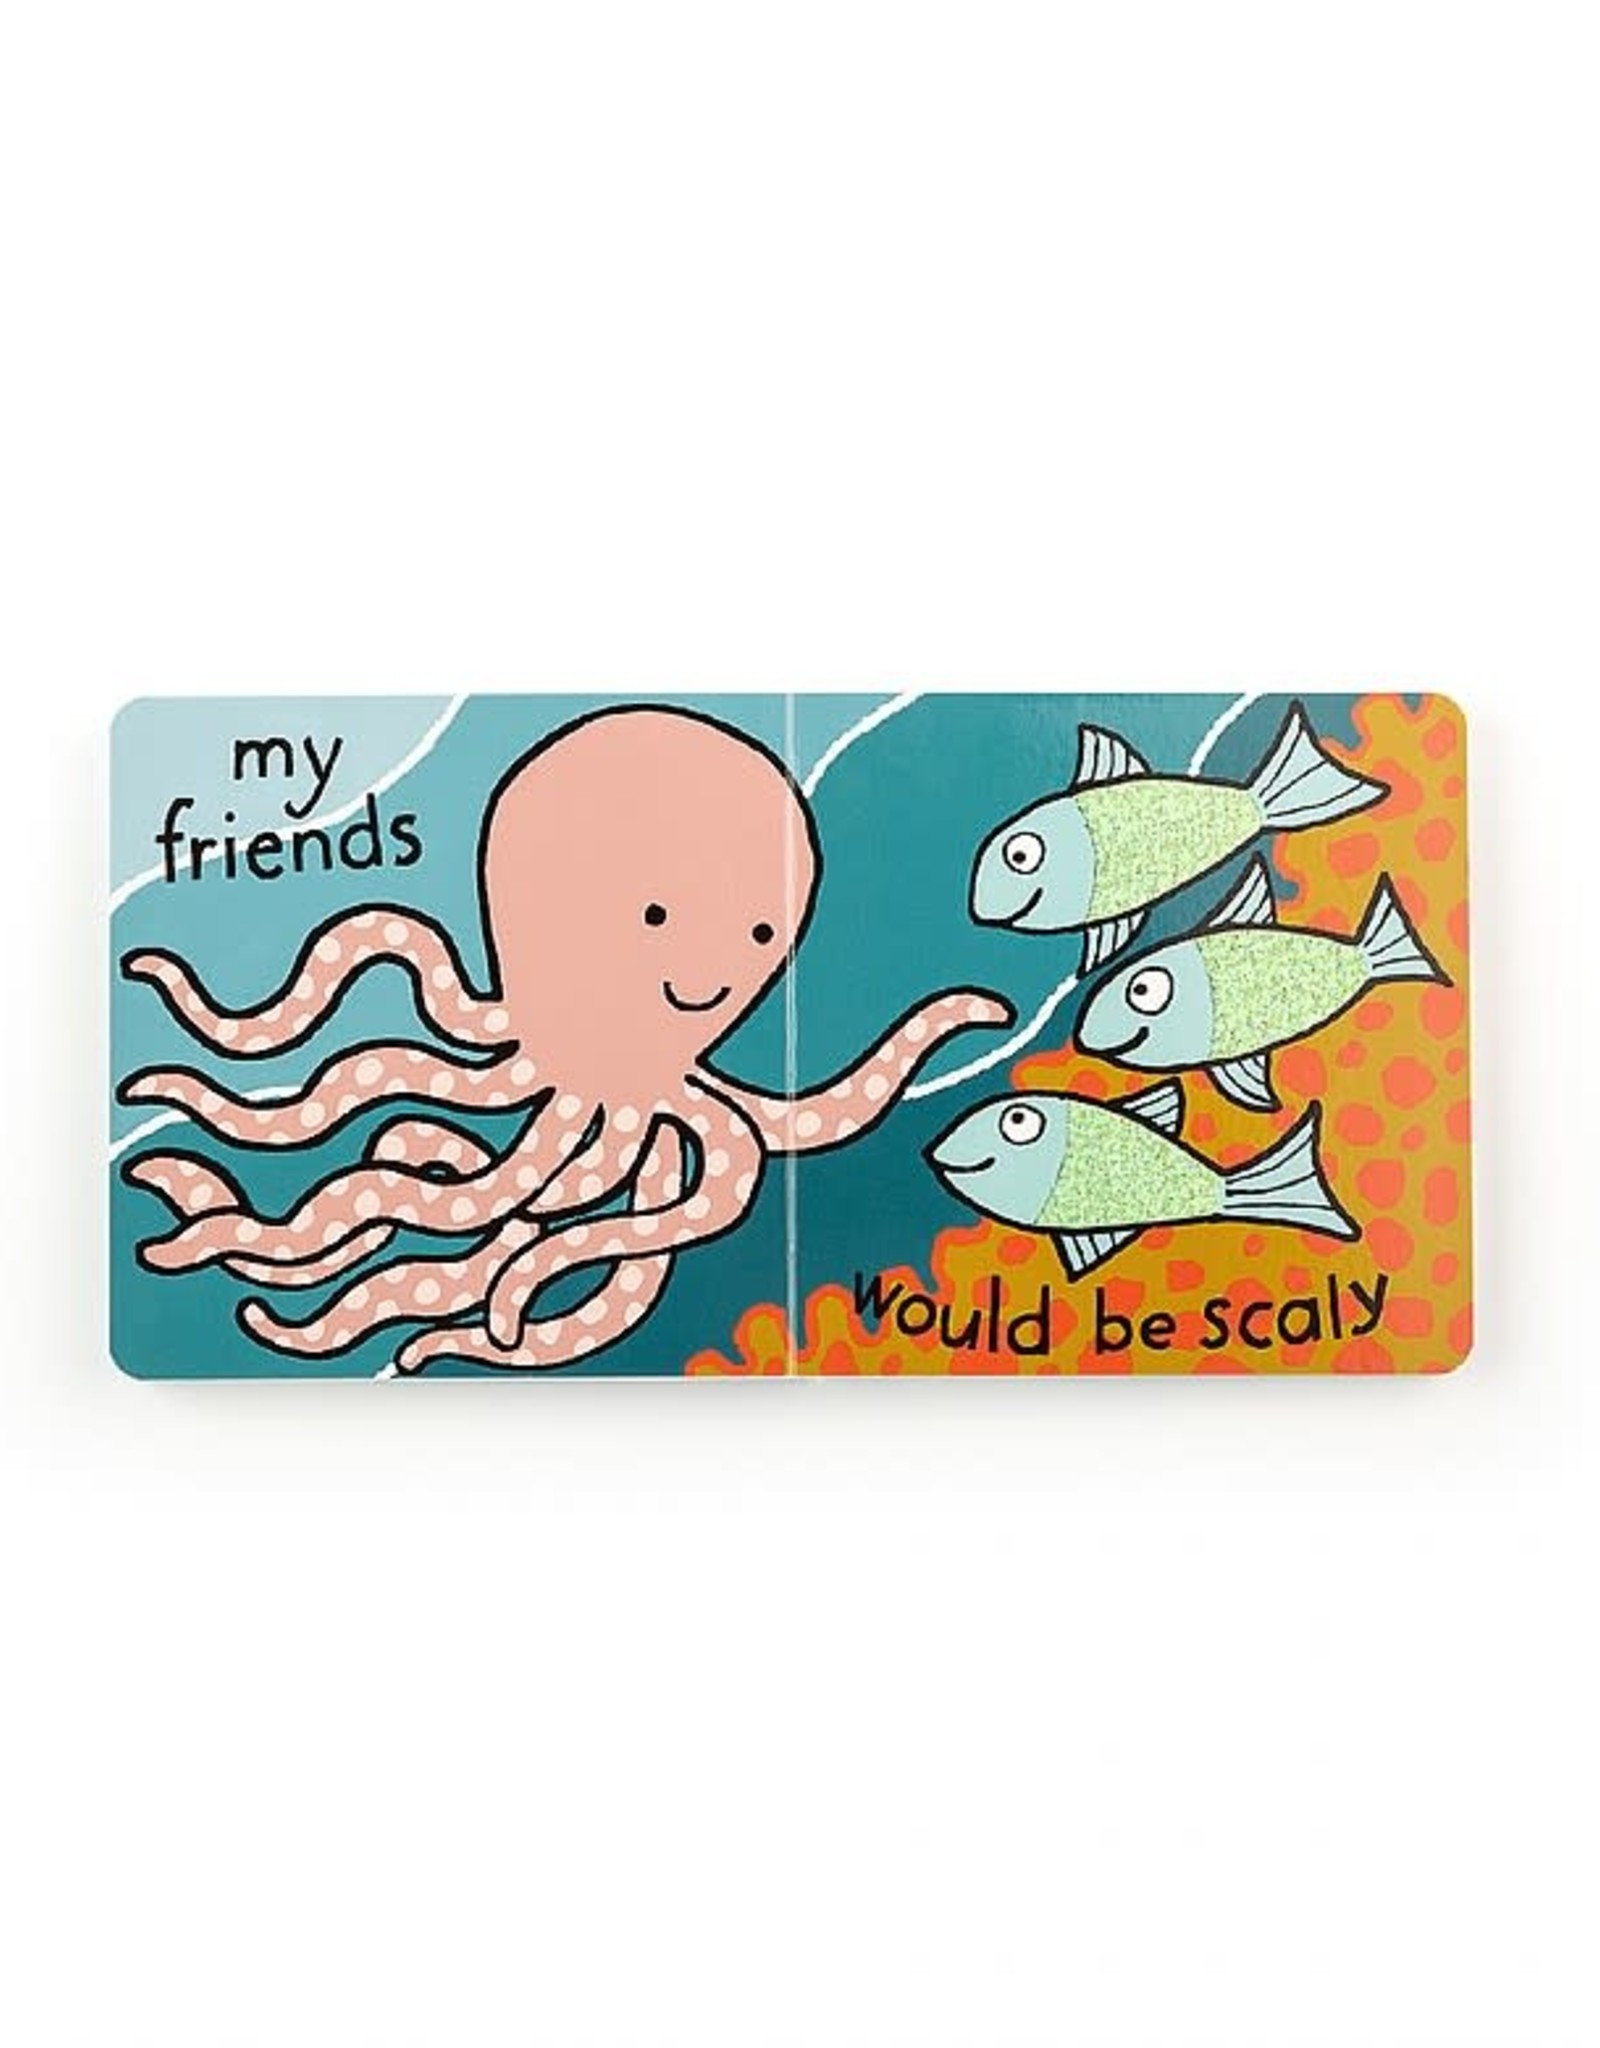 Jelly Cat If I were An Octopus Book